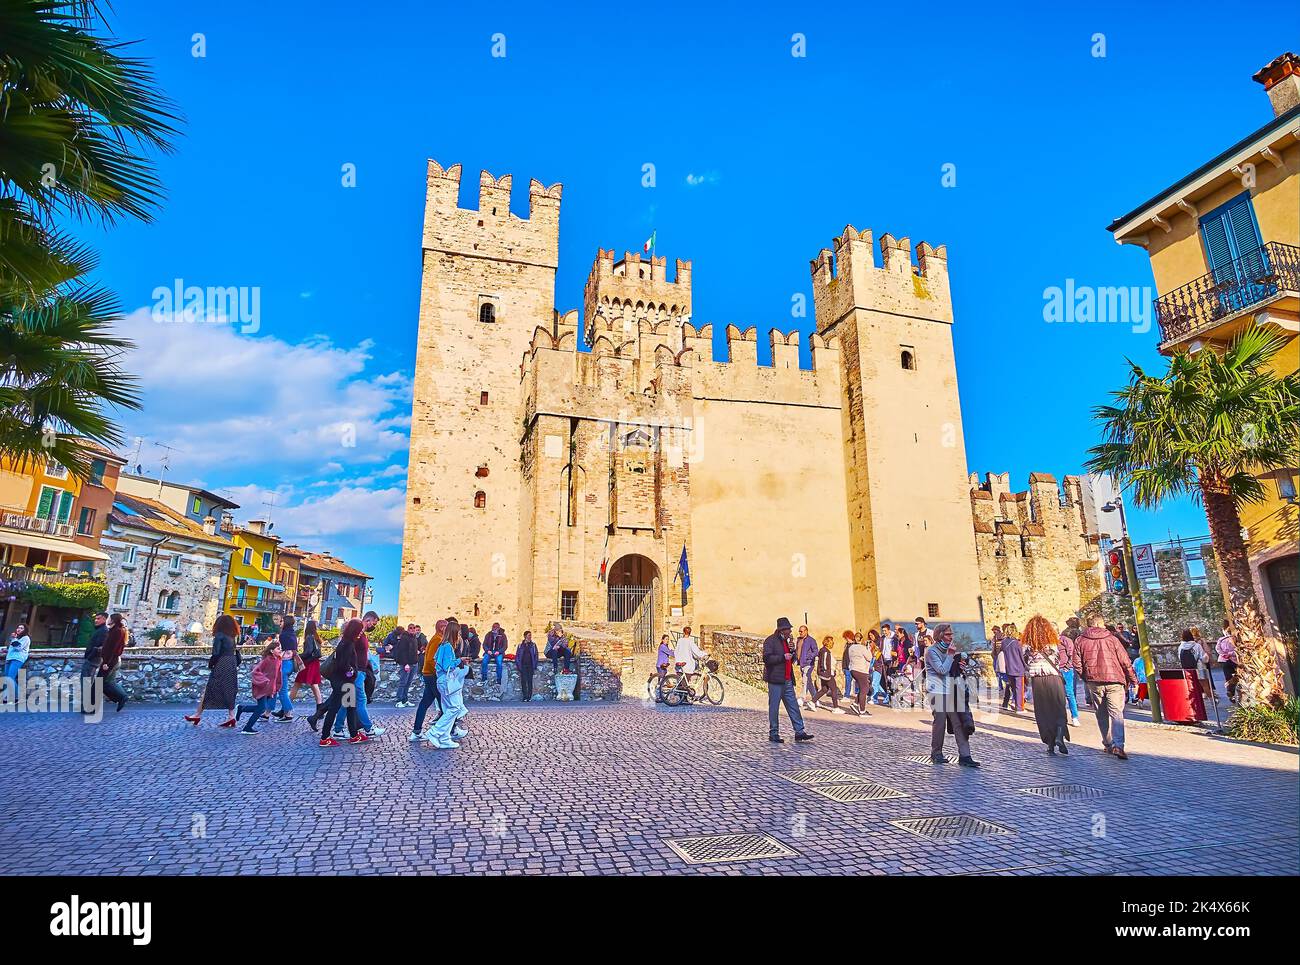 SIRMIONE, ITALY - APRIL 10, 2022: Preserved historic Scaligero Castle on Piazza Castello with massive stone walls and tall towers, on April 10 in Sirm Stock Photo